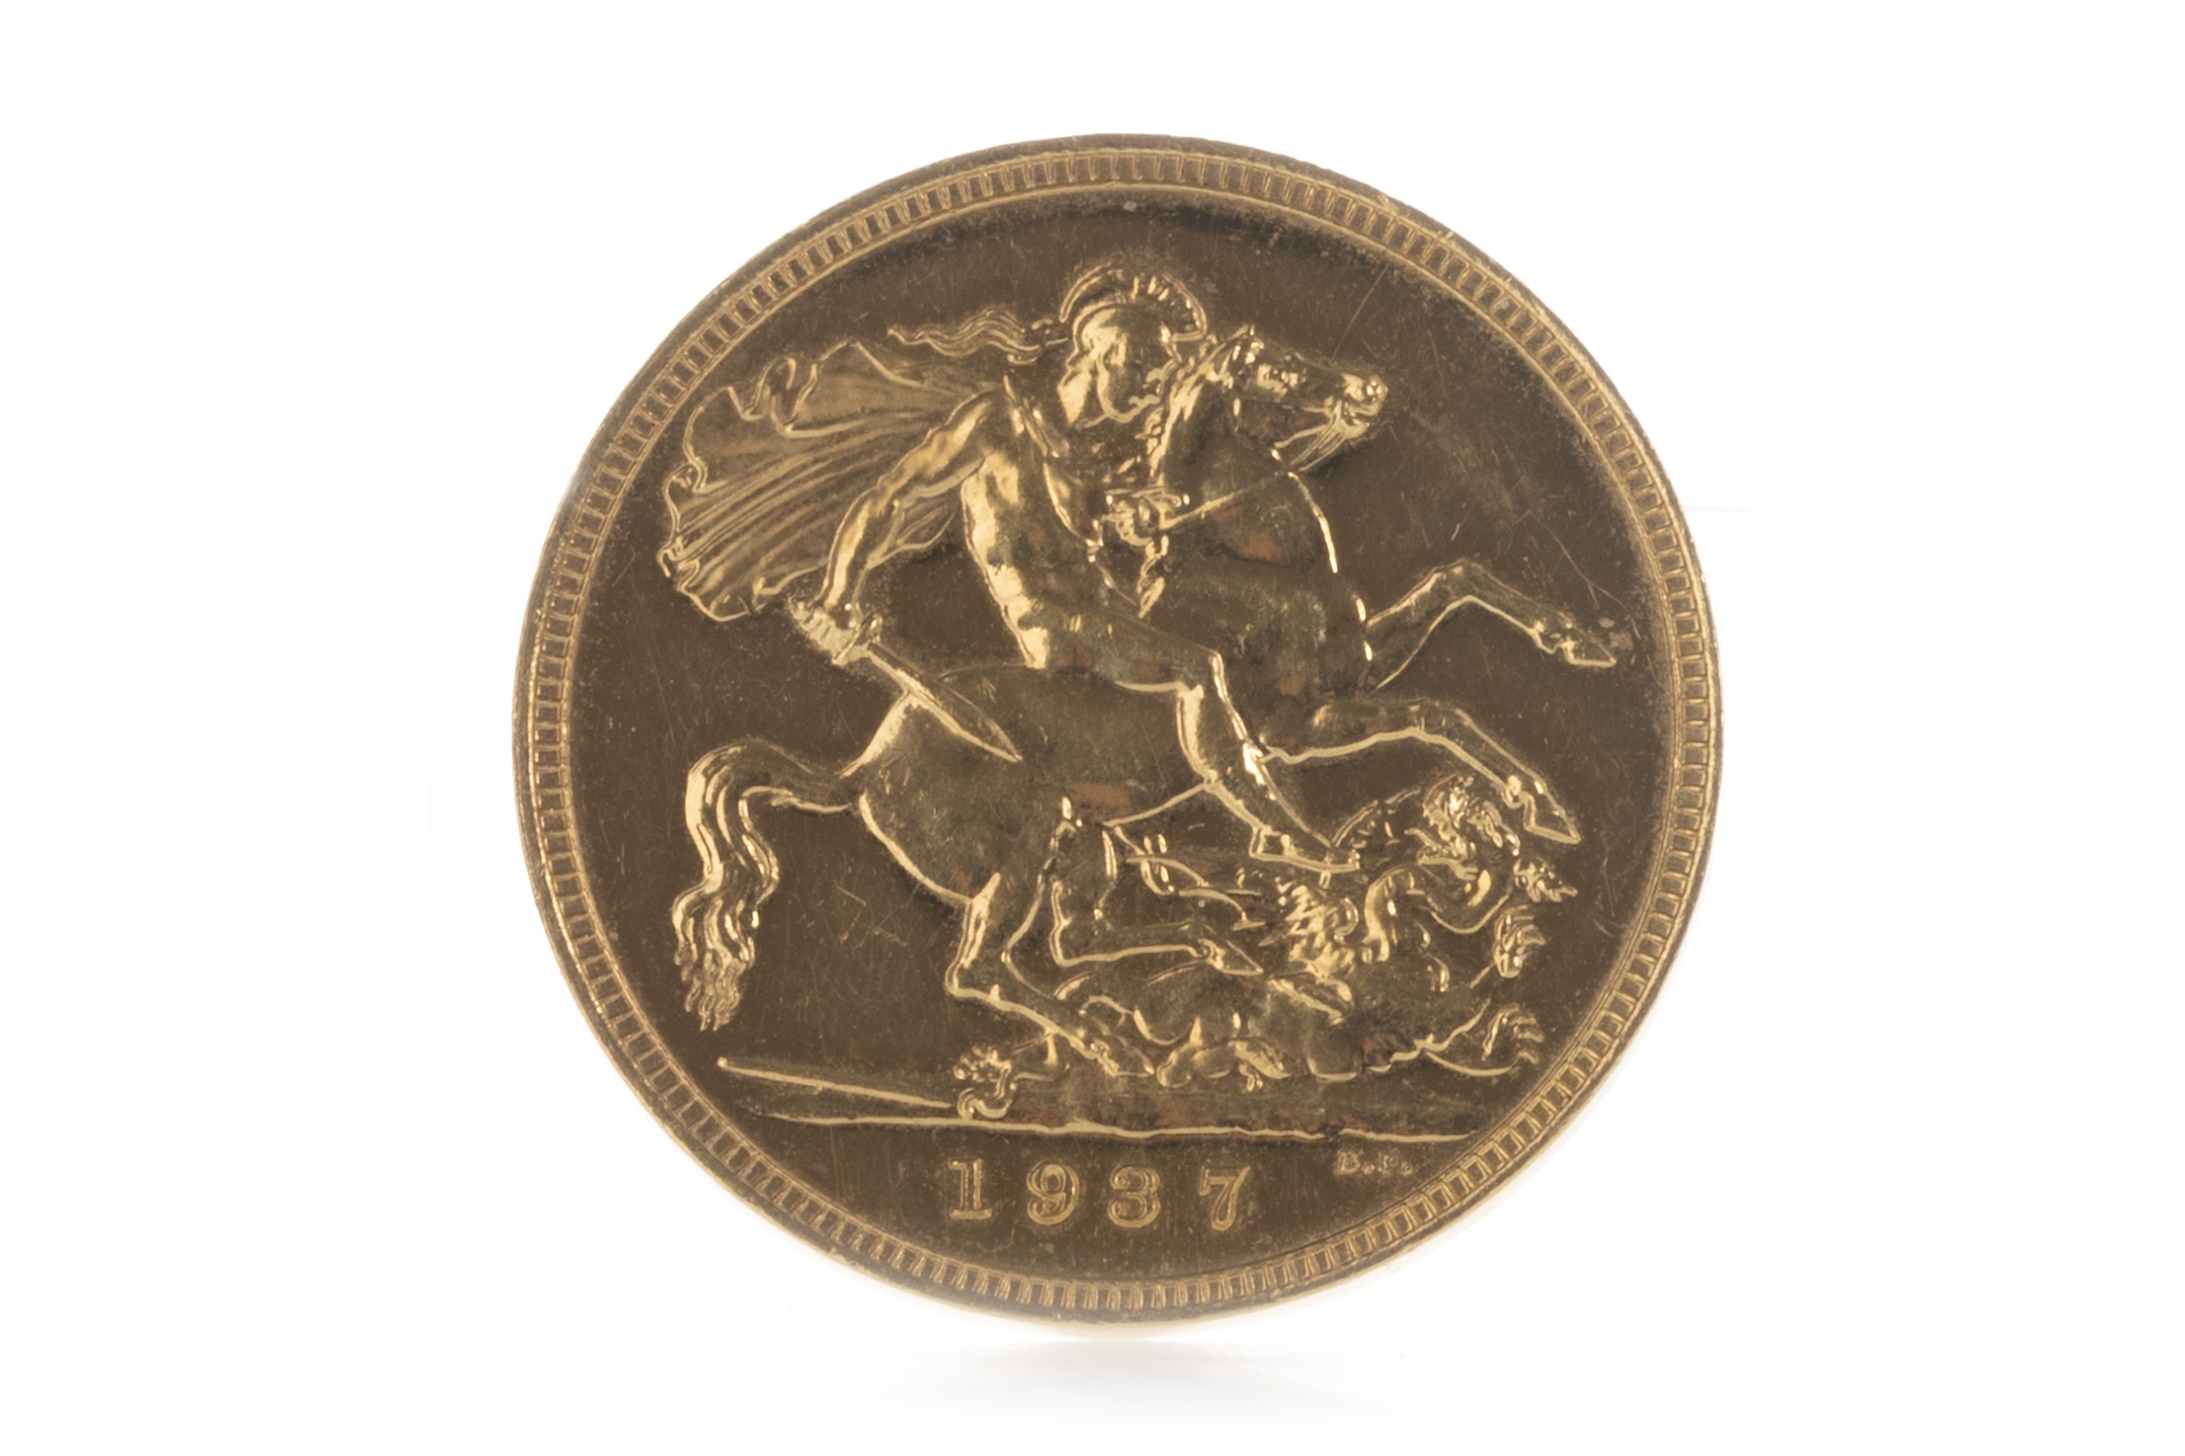 A GEORGE VI (1936 - 1952) GOLD SOVEREIGN DATED 1937